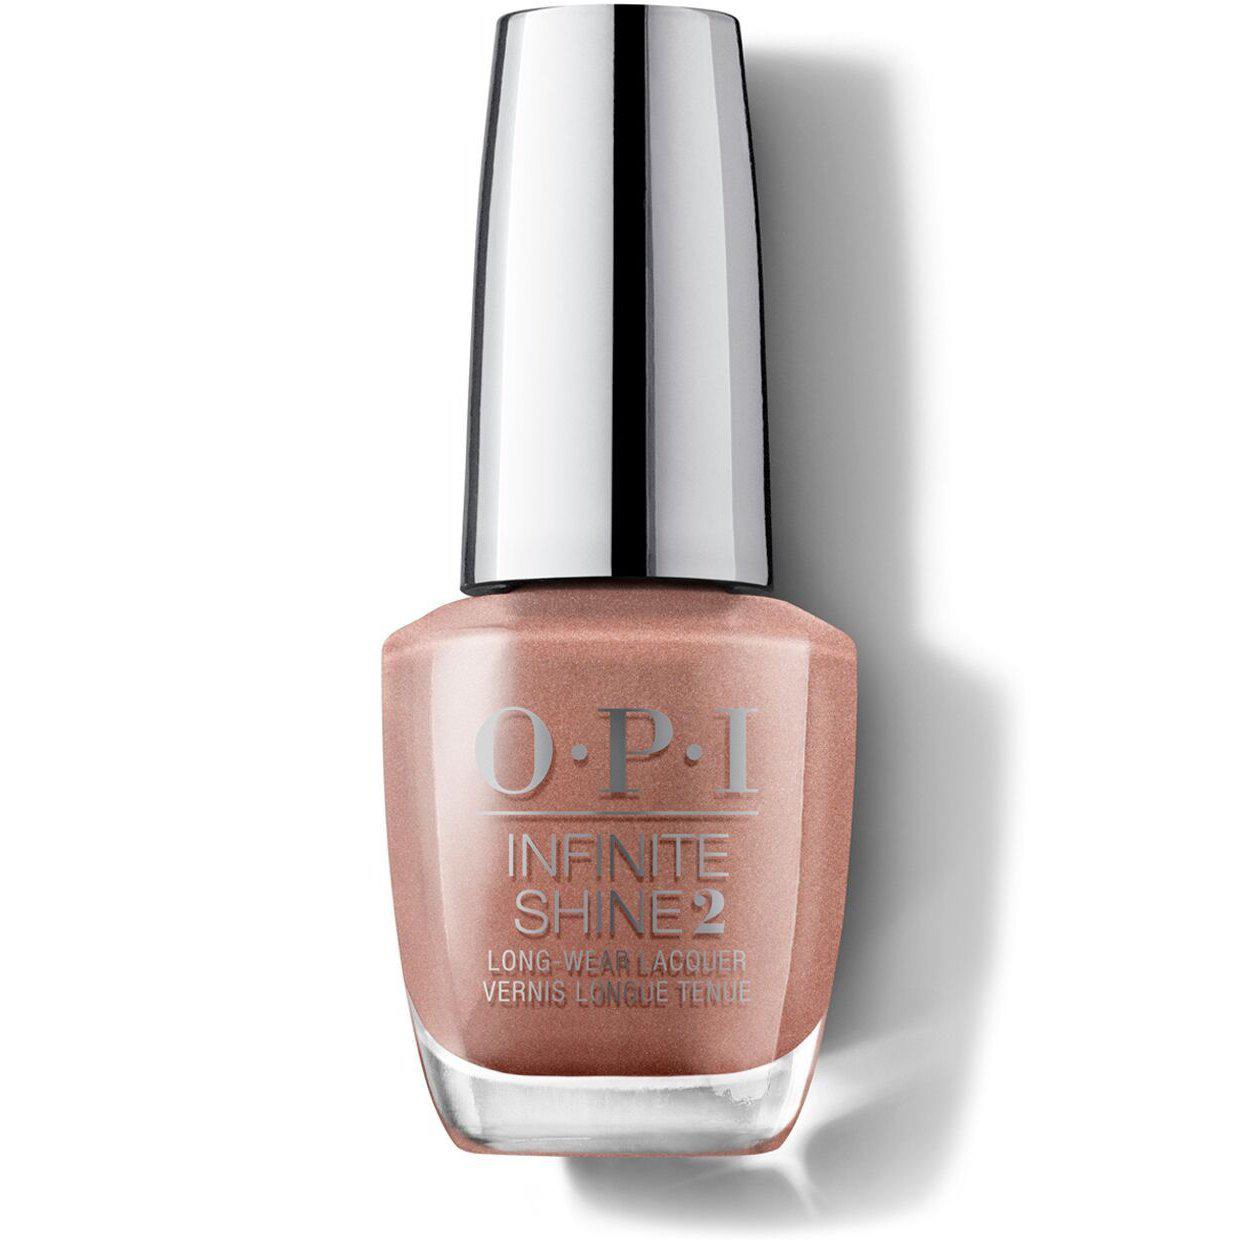 Opi infinite shine Made it to the Seventh Hill